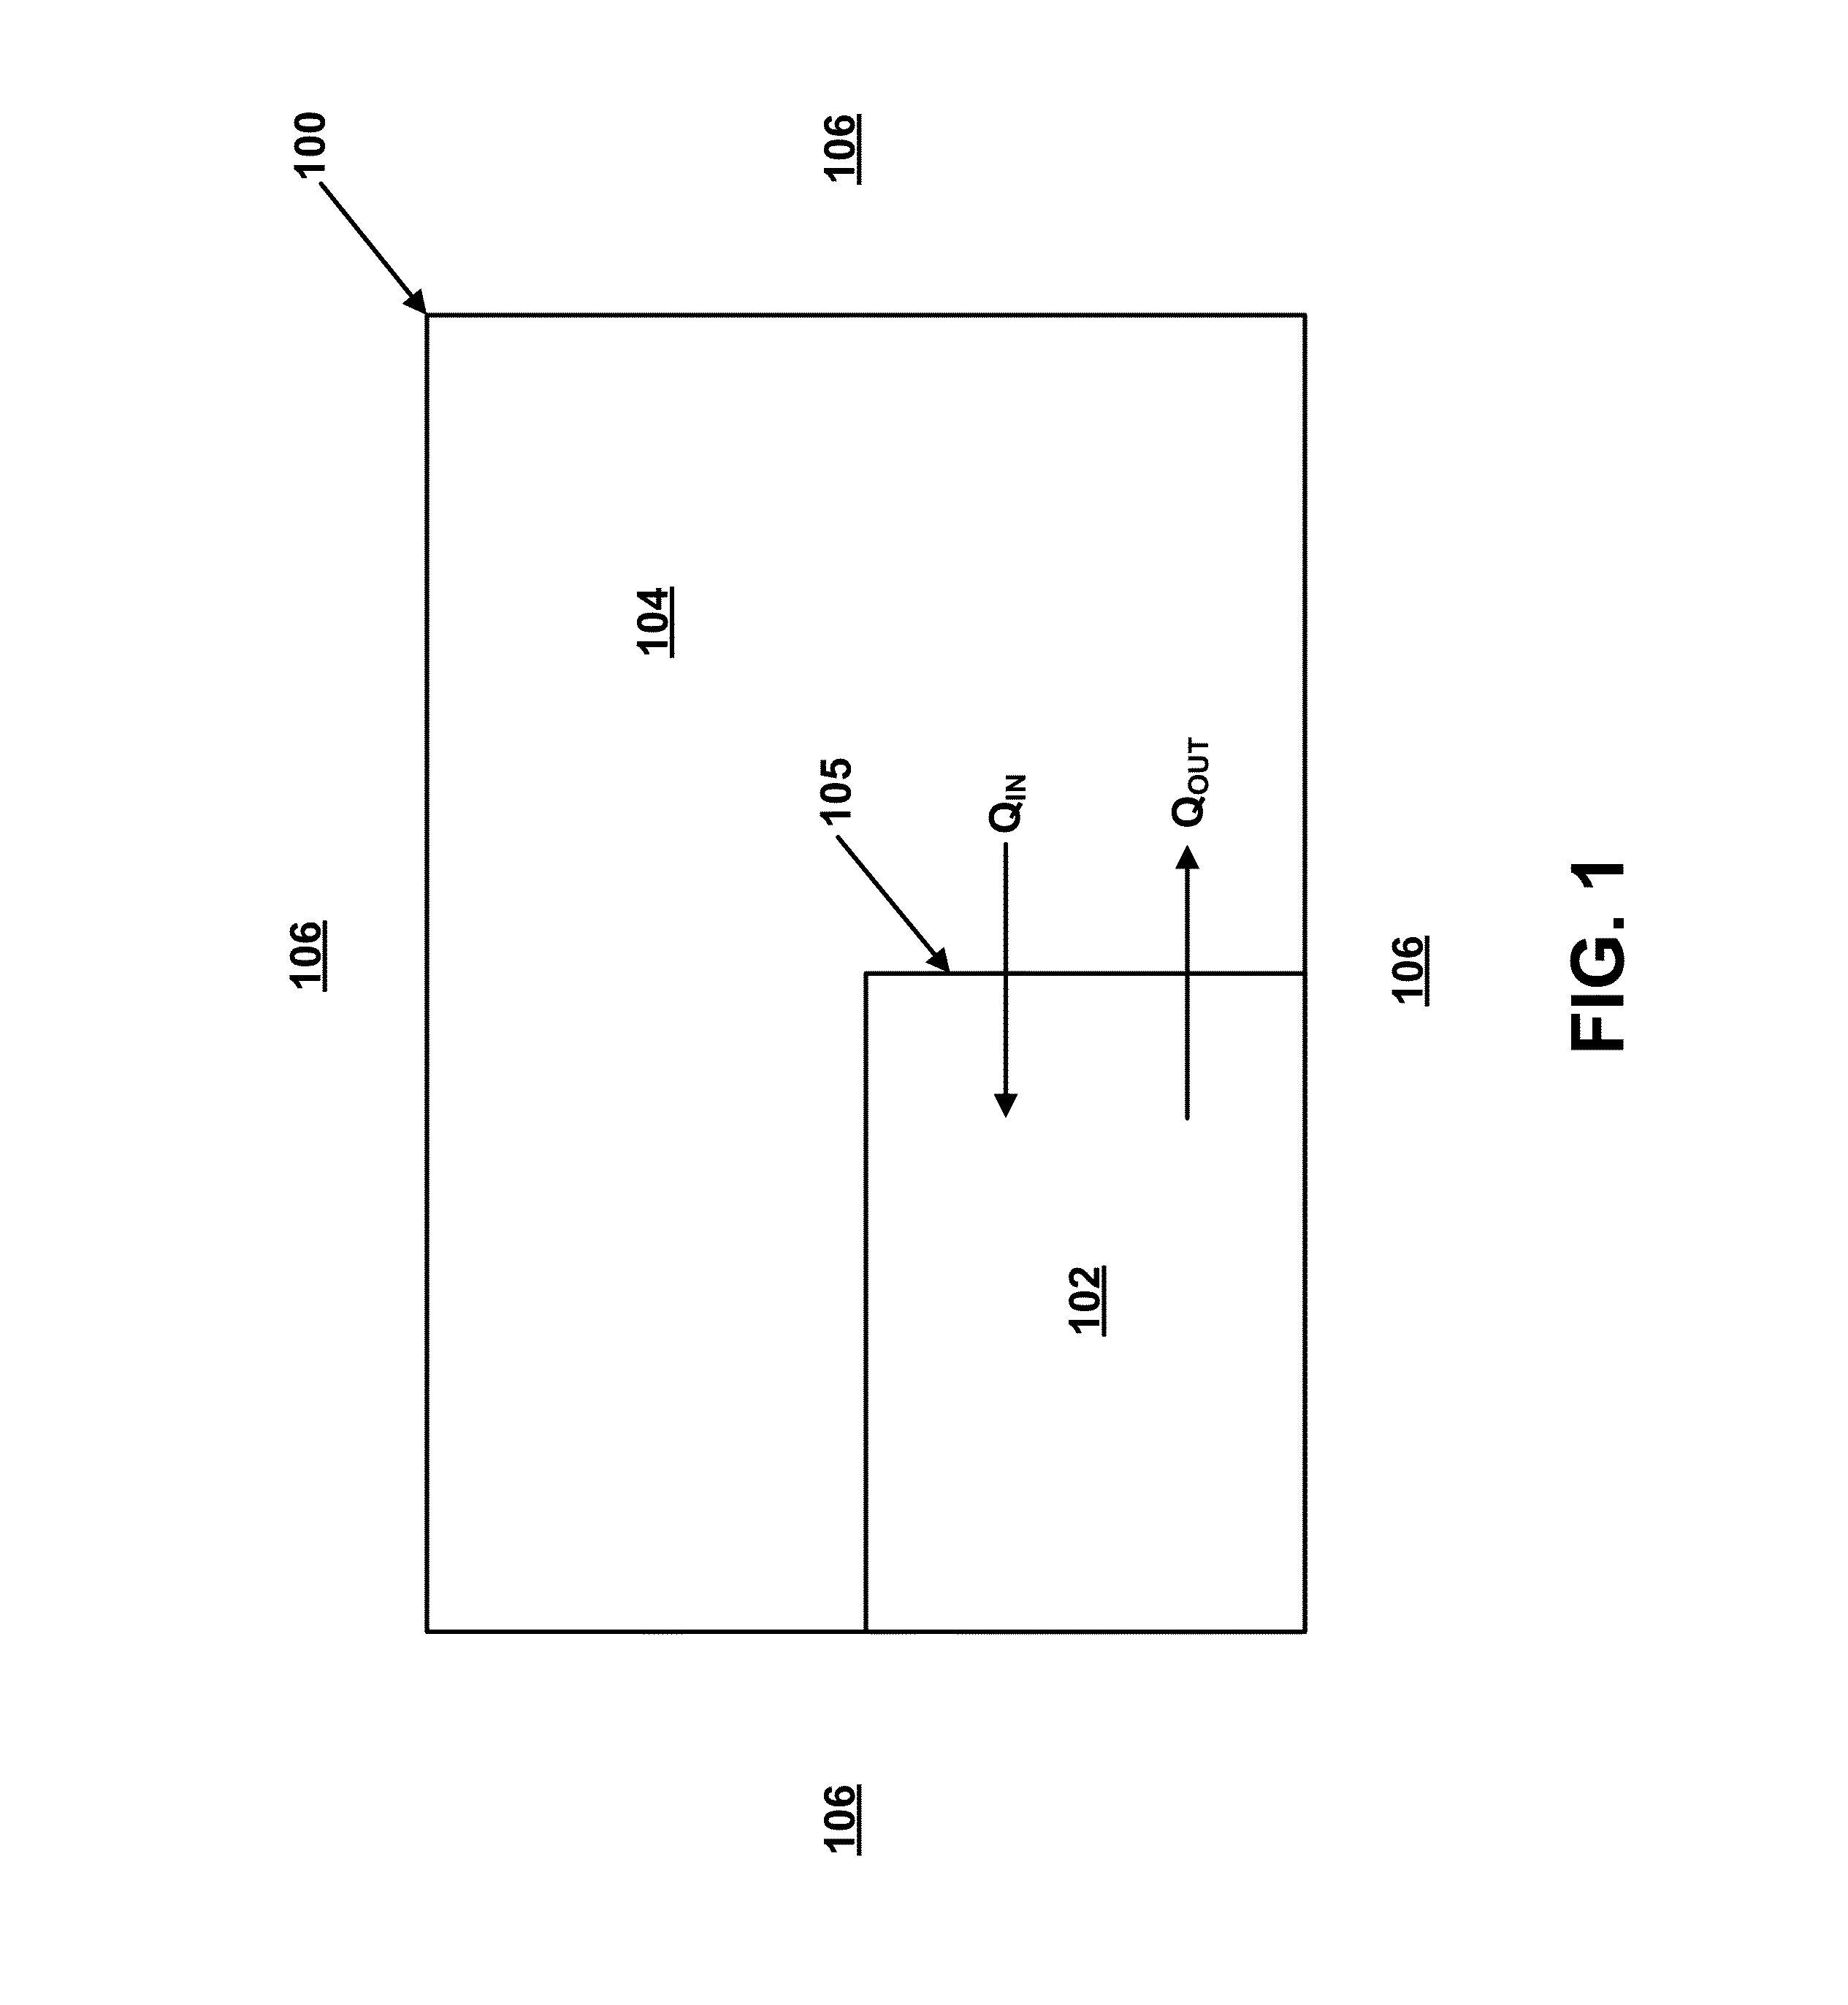 Air sample tracking system and method